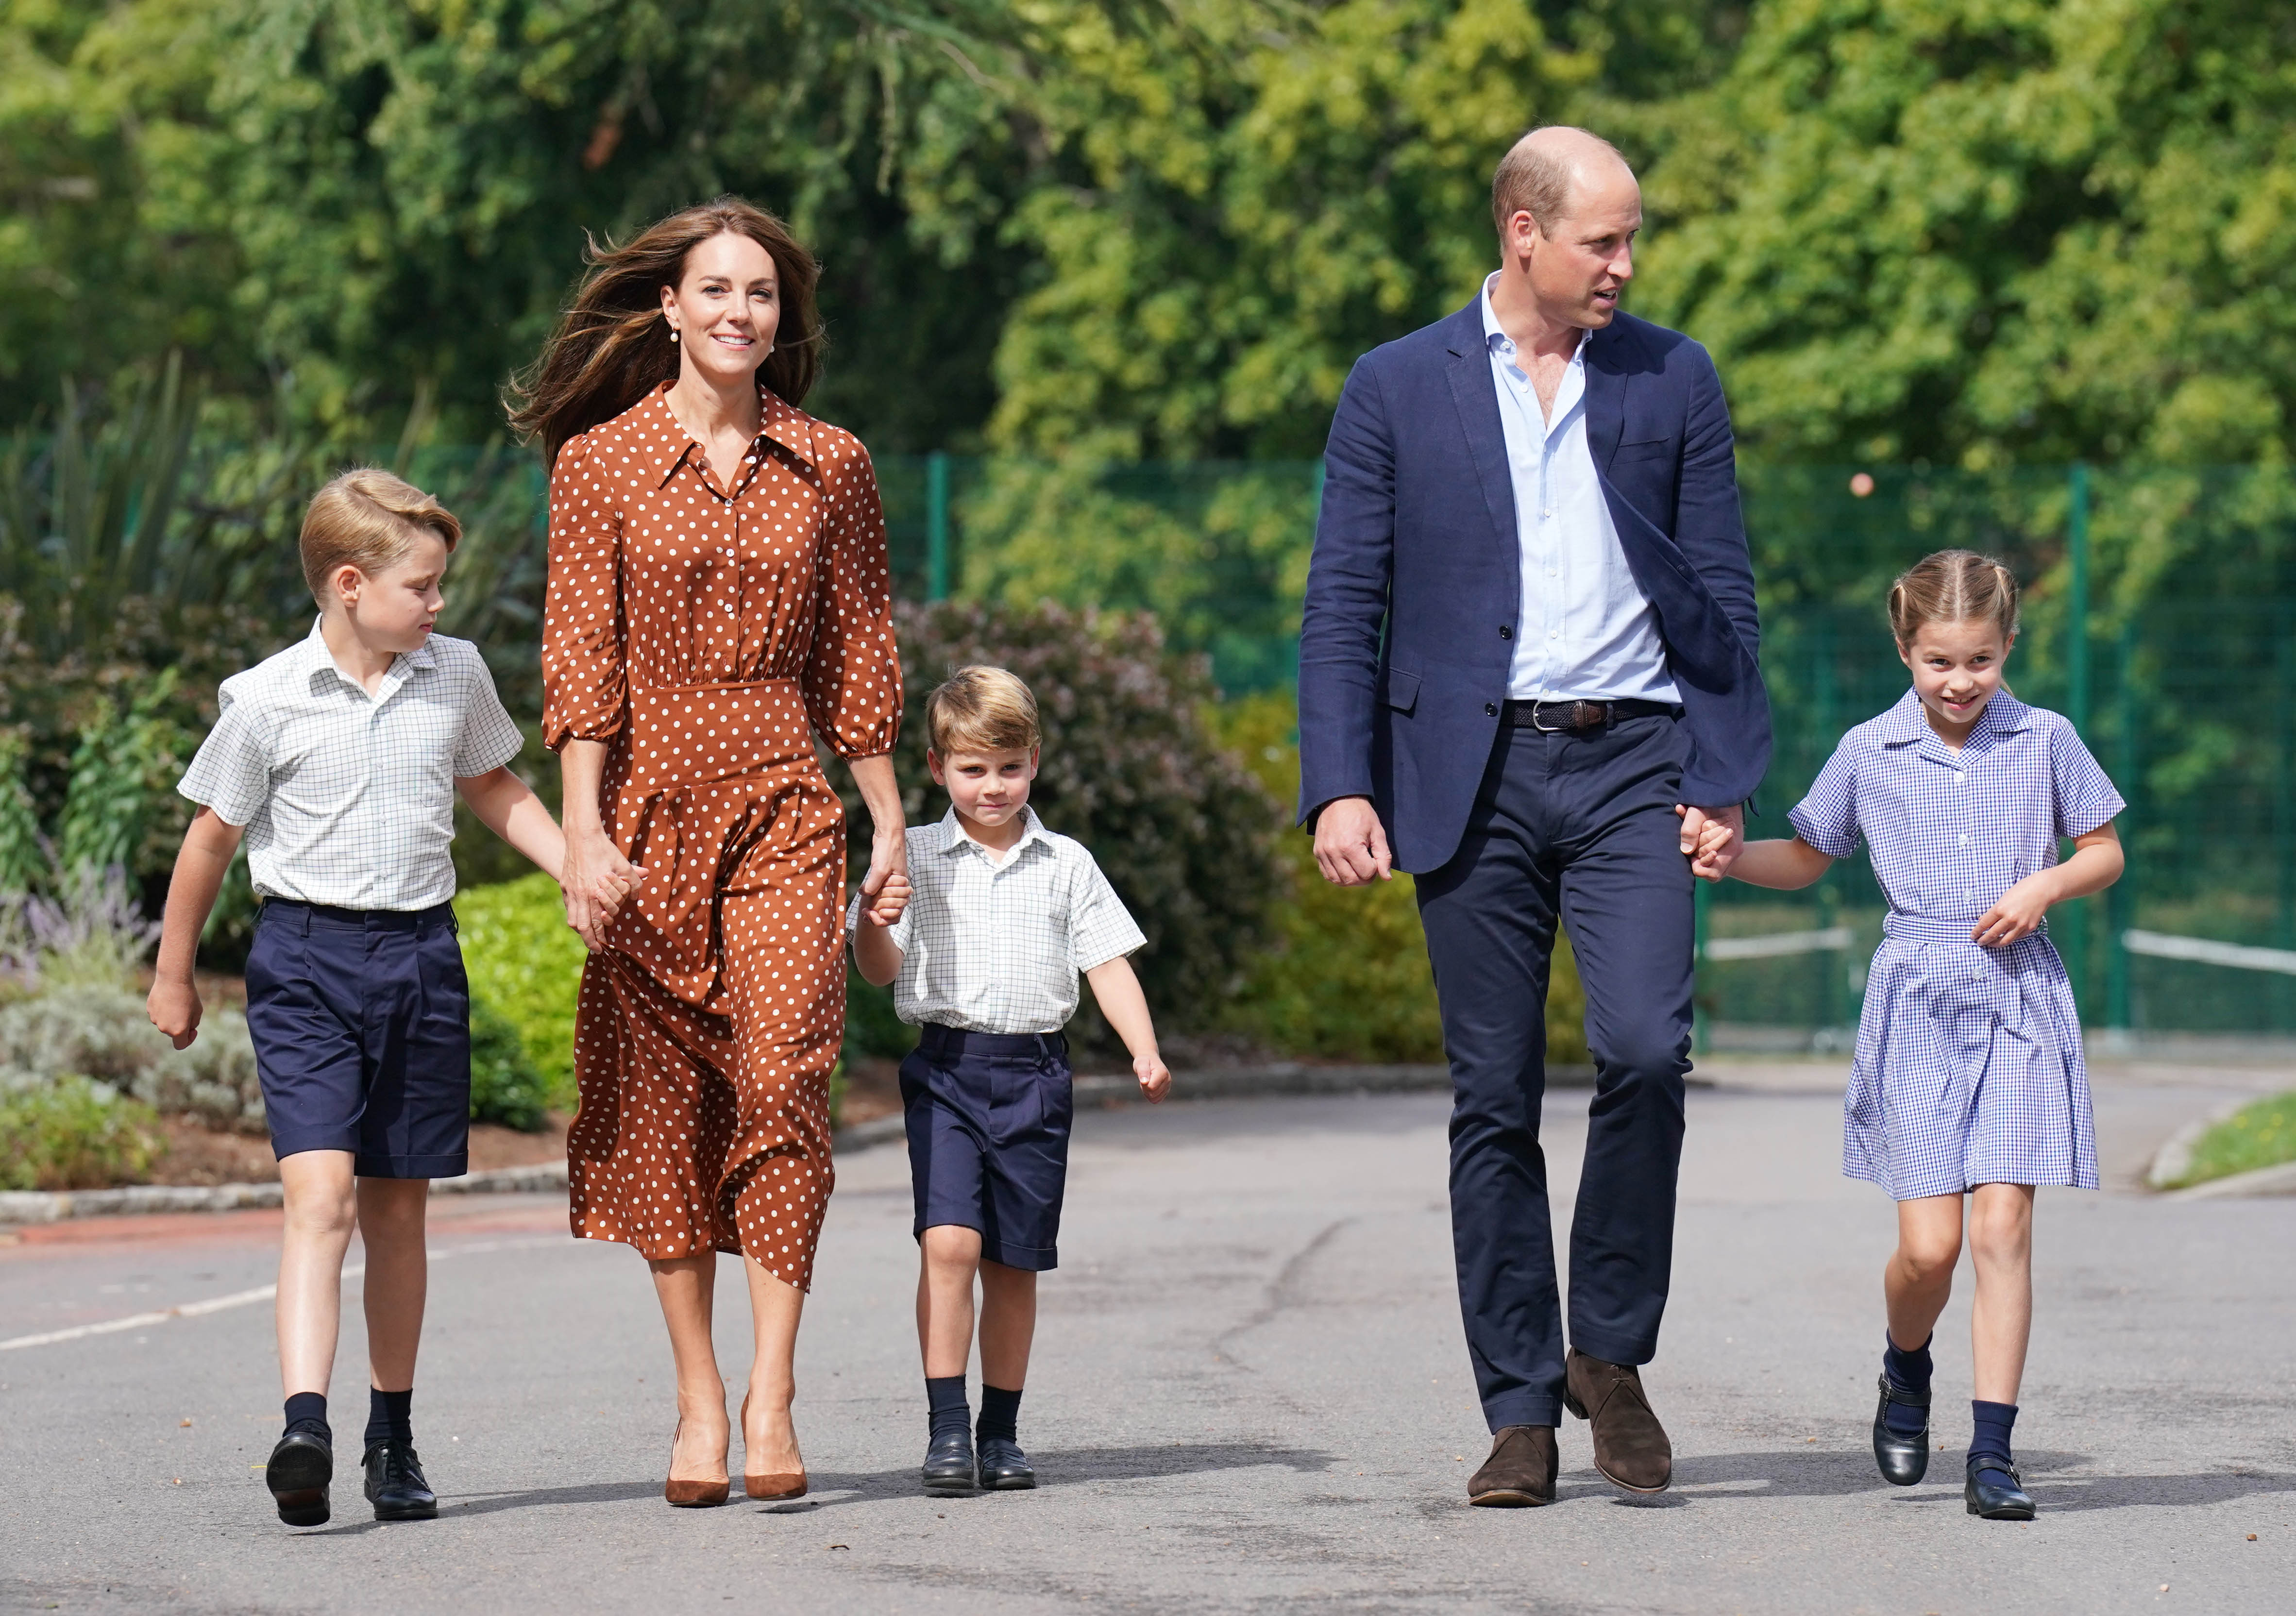 Prince George, Princess Catherine, Prince Louis, Prince William and Princess Charlotte arriving at Lambrook School in Bracknell, England on September 7, 2022 | Source: Getty Images